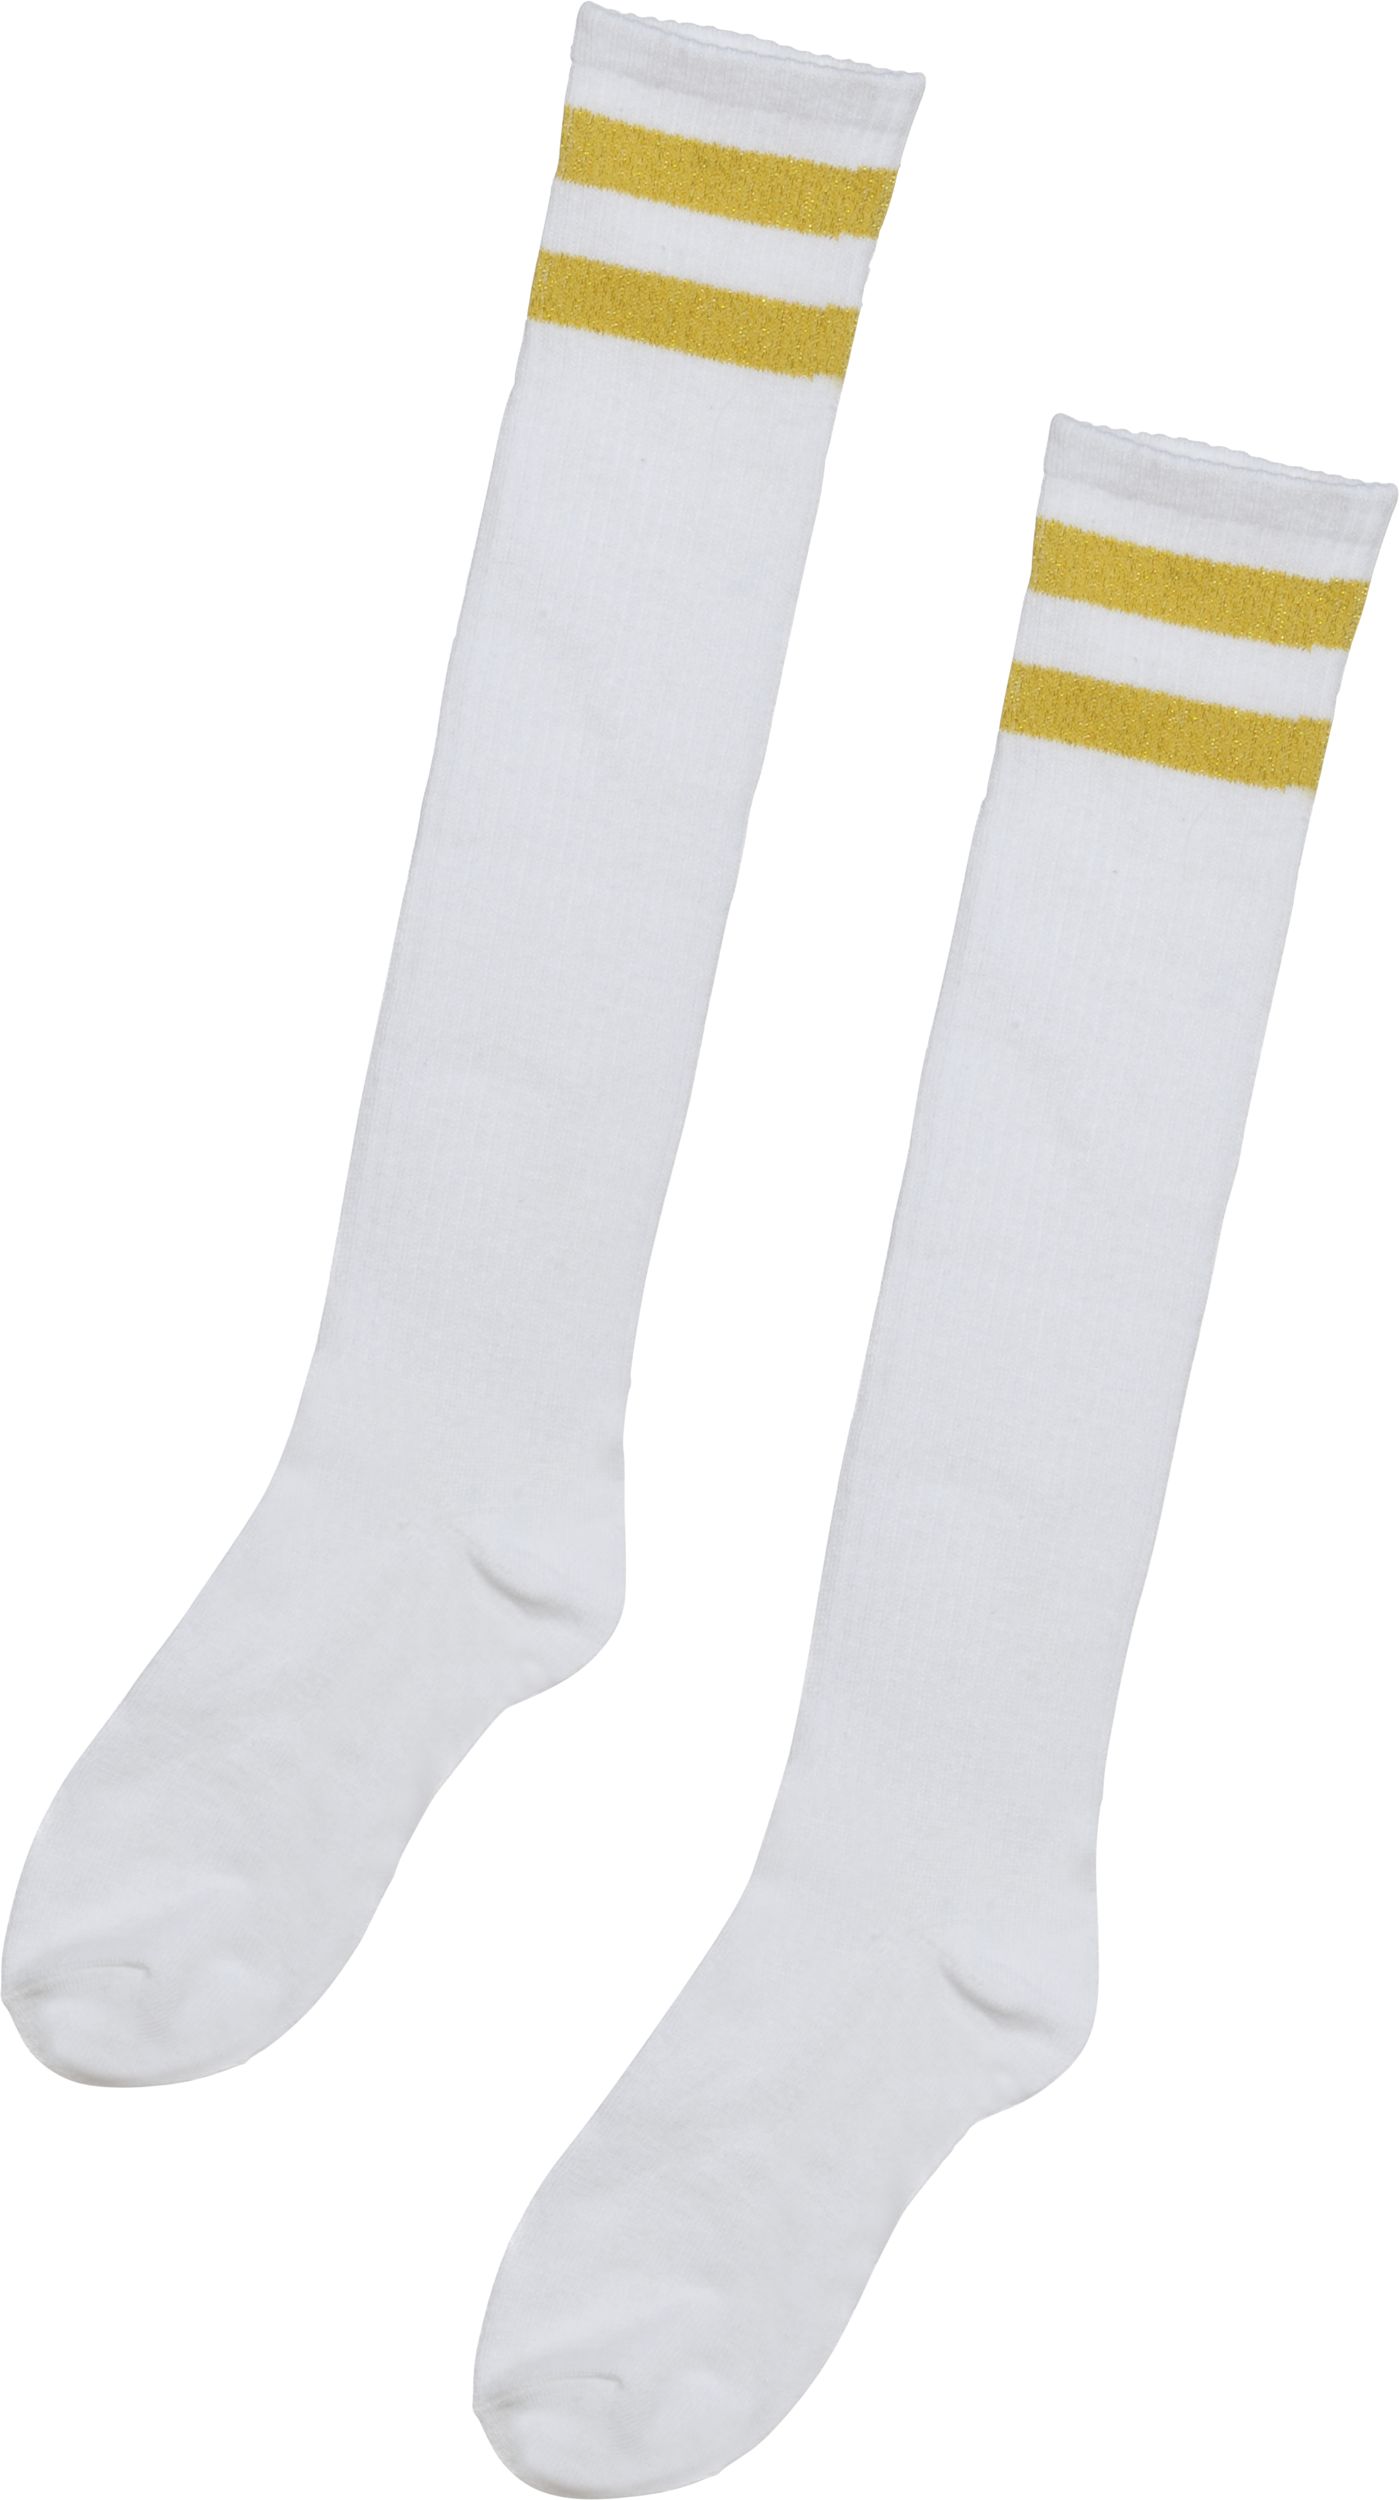 Adult Athletic Knee High Socks, Assorted Colours Striped, One Size